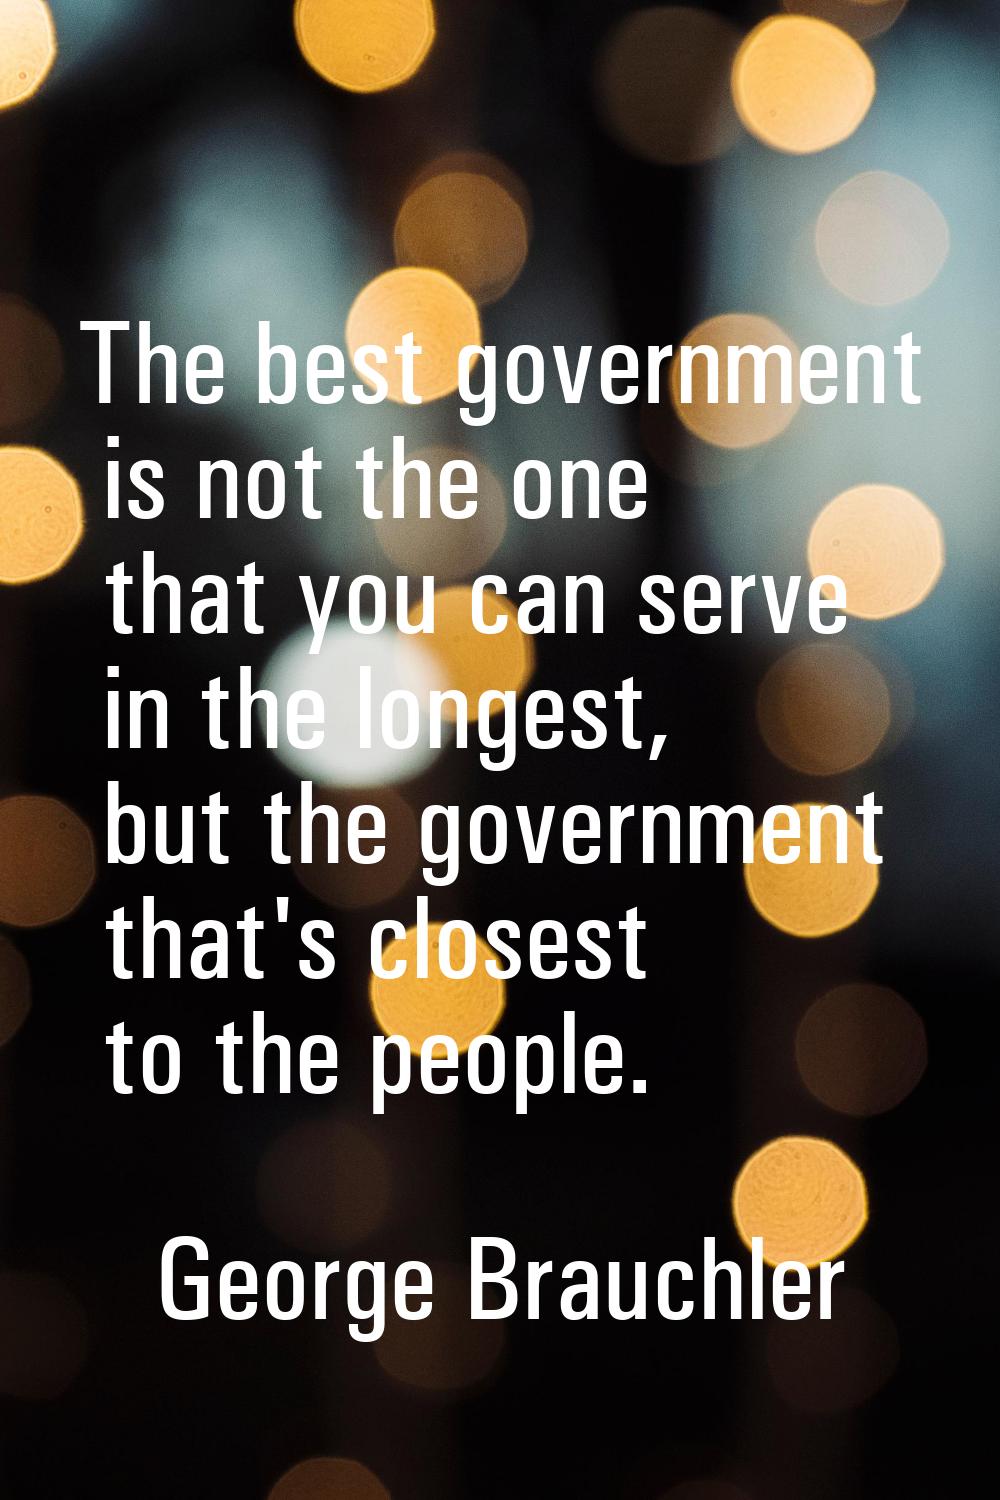 The best government is not the one that you can serve in the longest, but the government that's clo